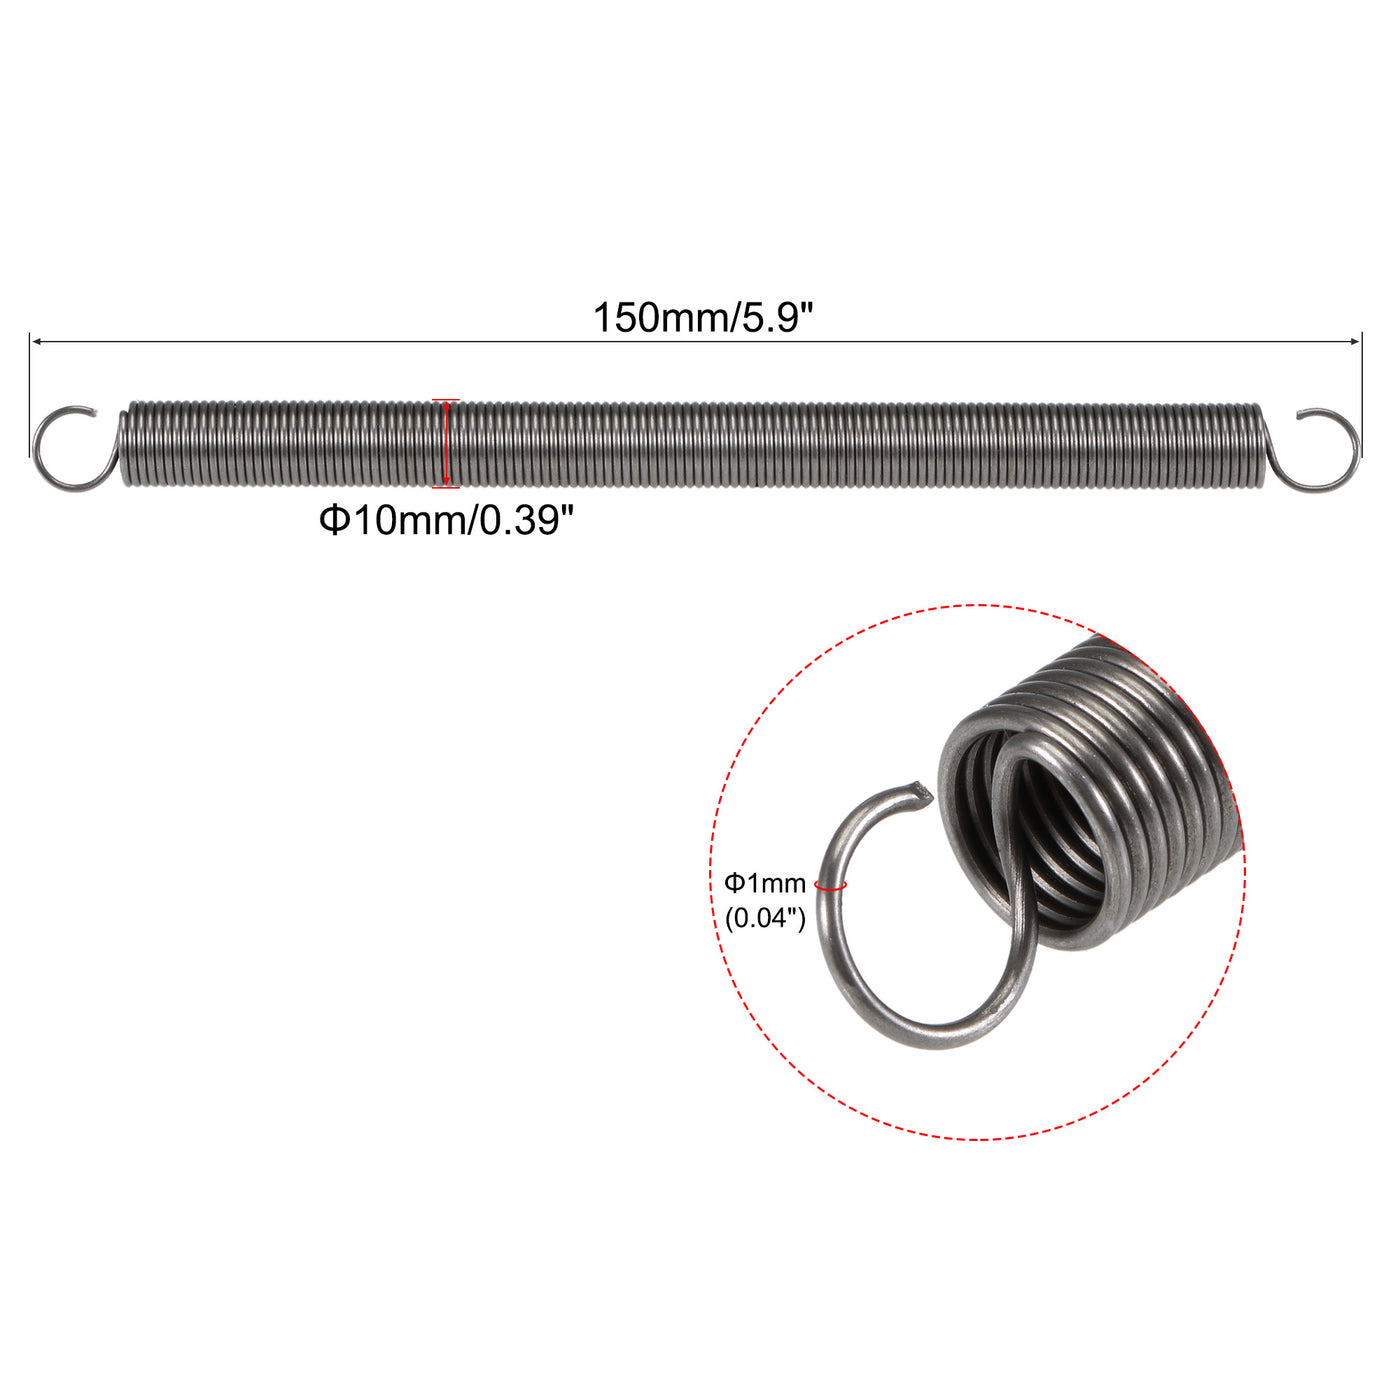 Uxcell Uxcell 1mmx10mmx80mm Extended Extension Spring ,3.3Lbs Load Capacity,Grey 2pcs